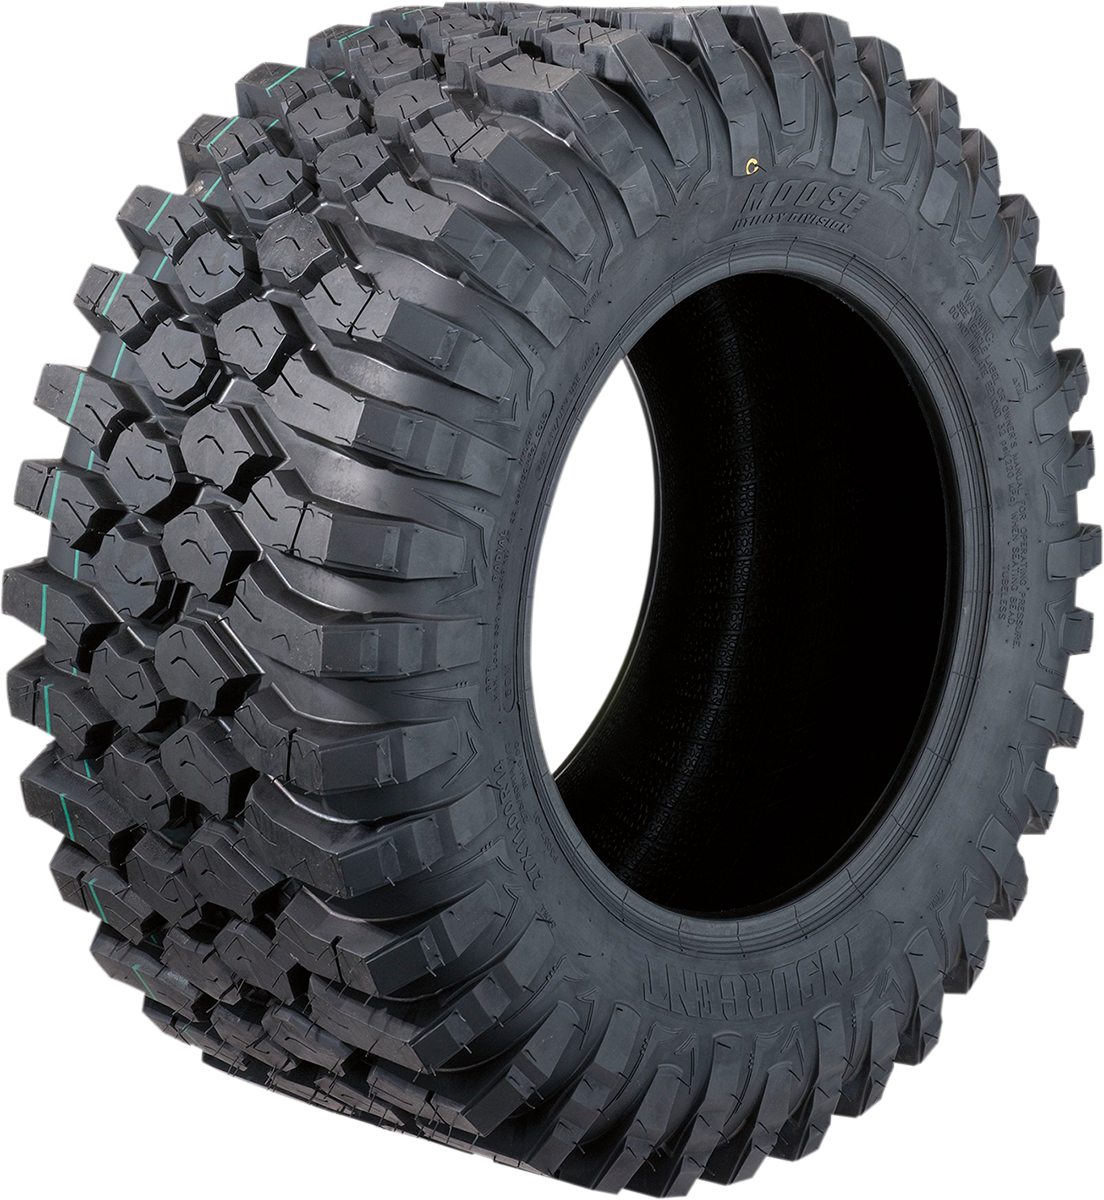 MOOSE UTILITY Tire - Insurgent - Front/Rear - 26x11R14 - 6 Ply 30572611148RDOT